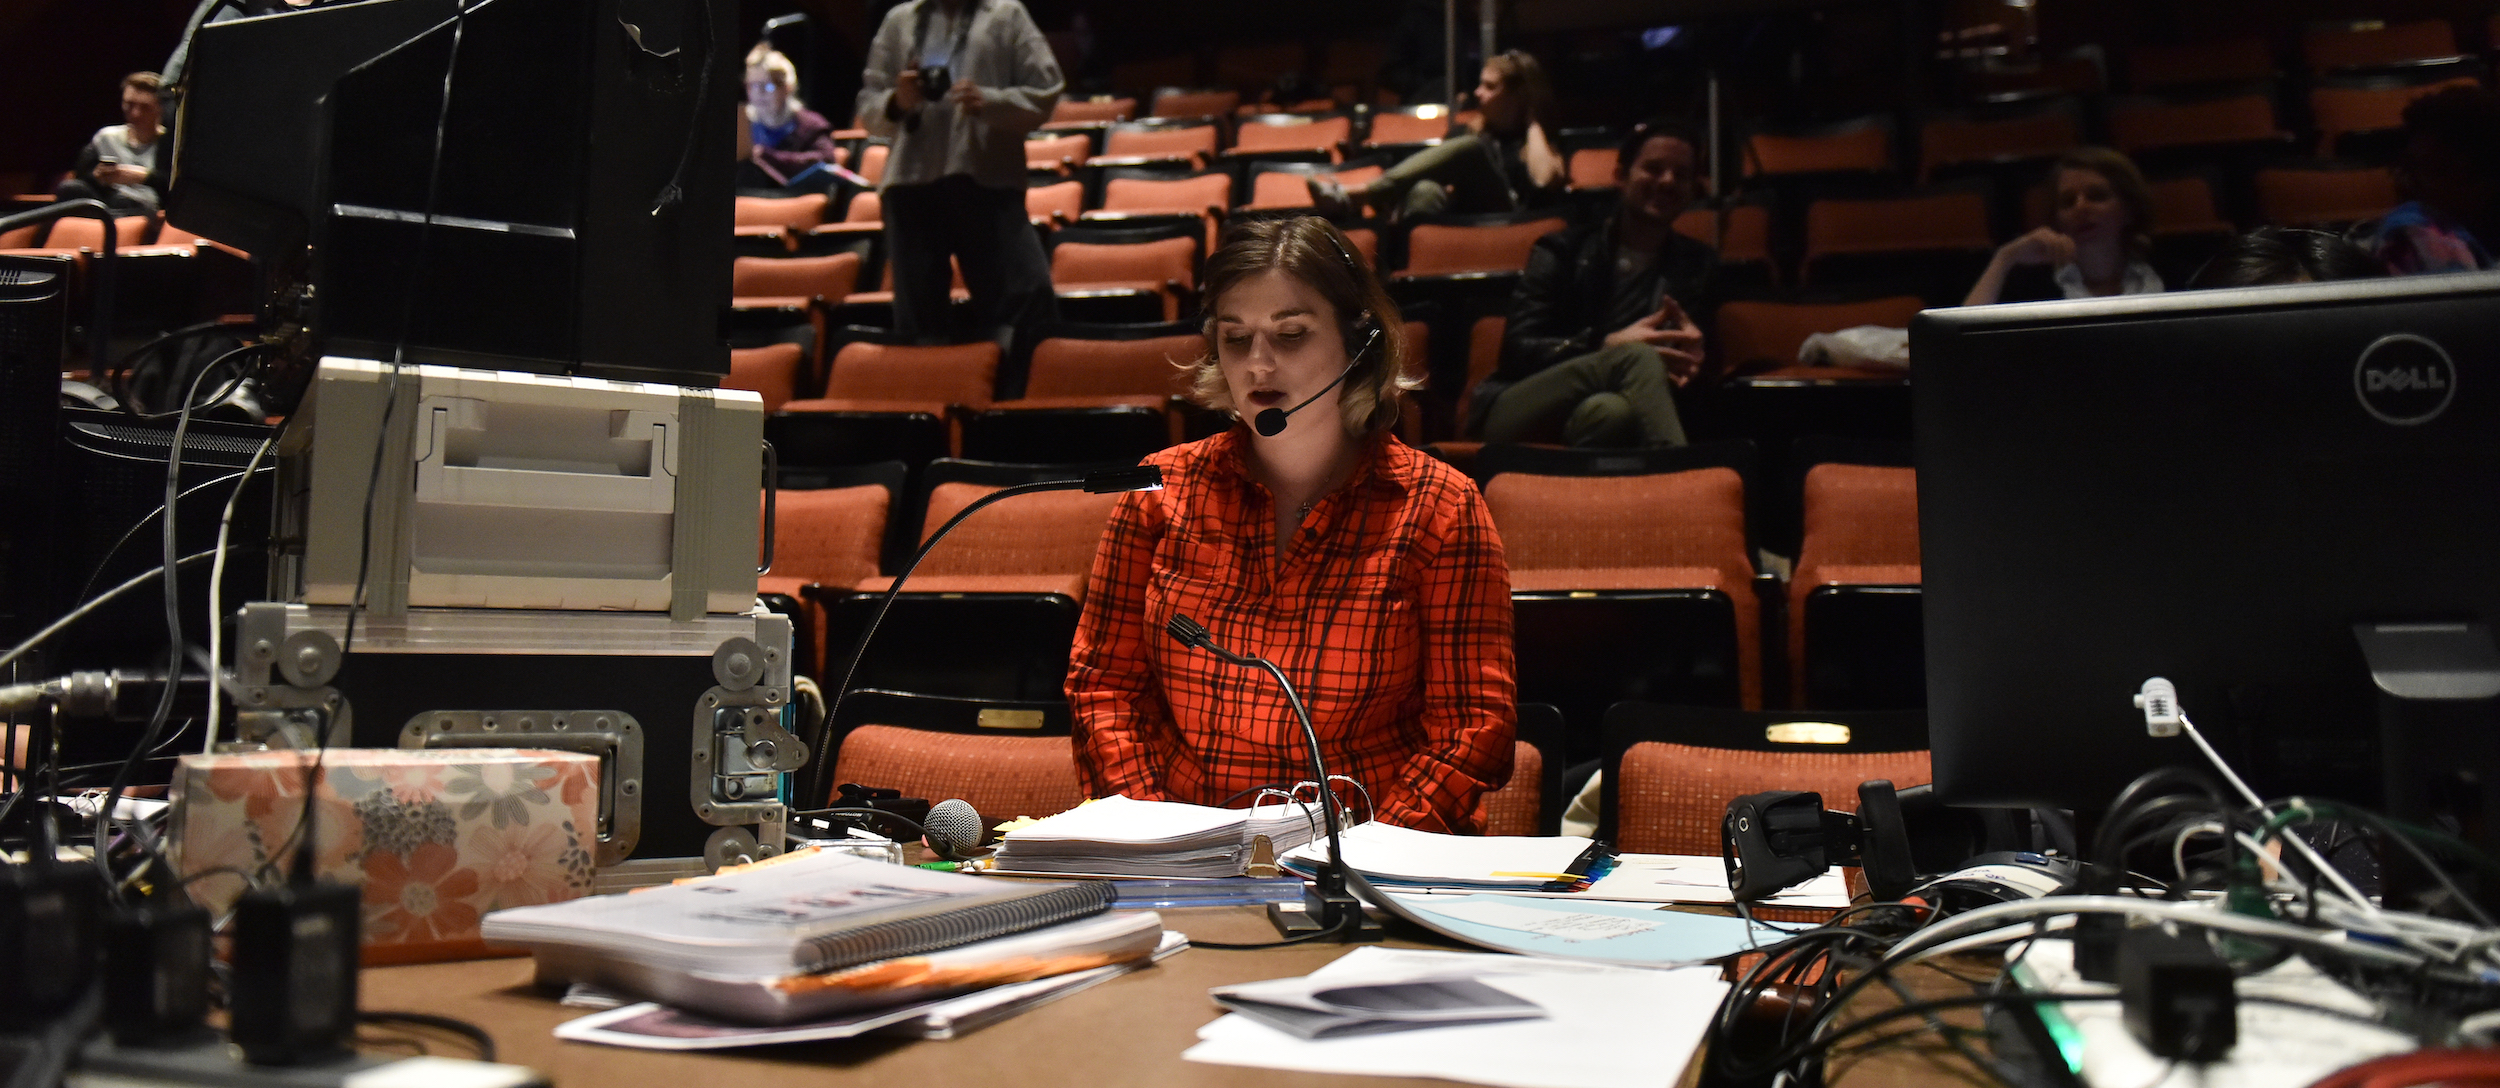 stage management in the amateur theatre